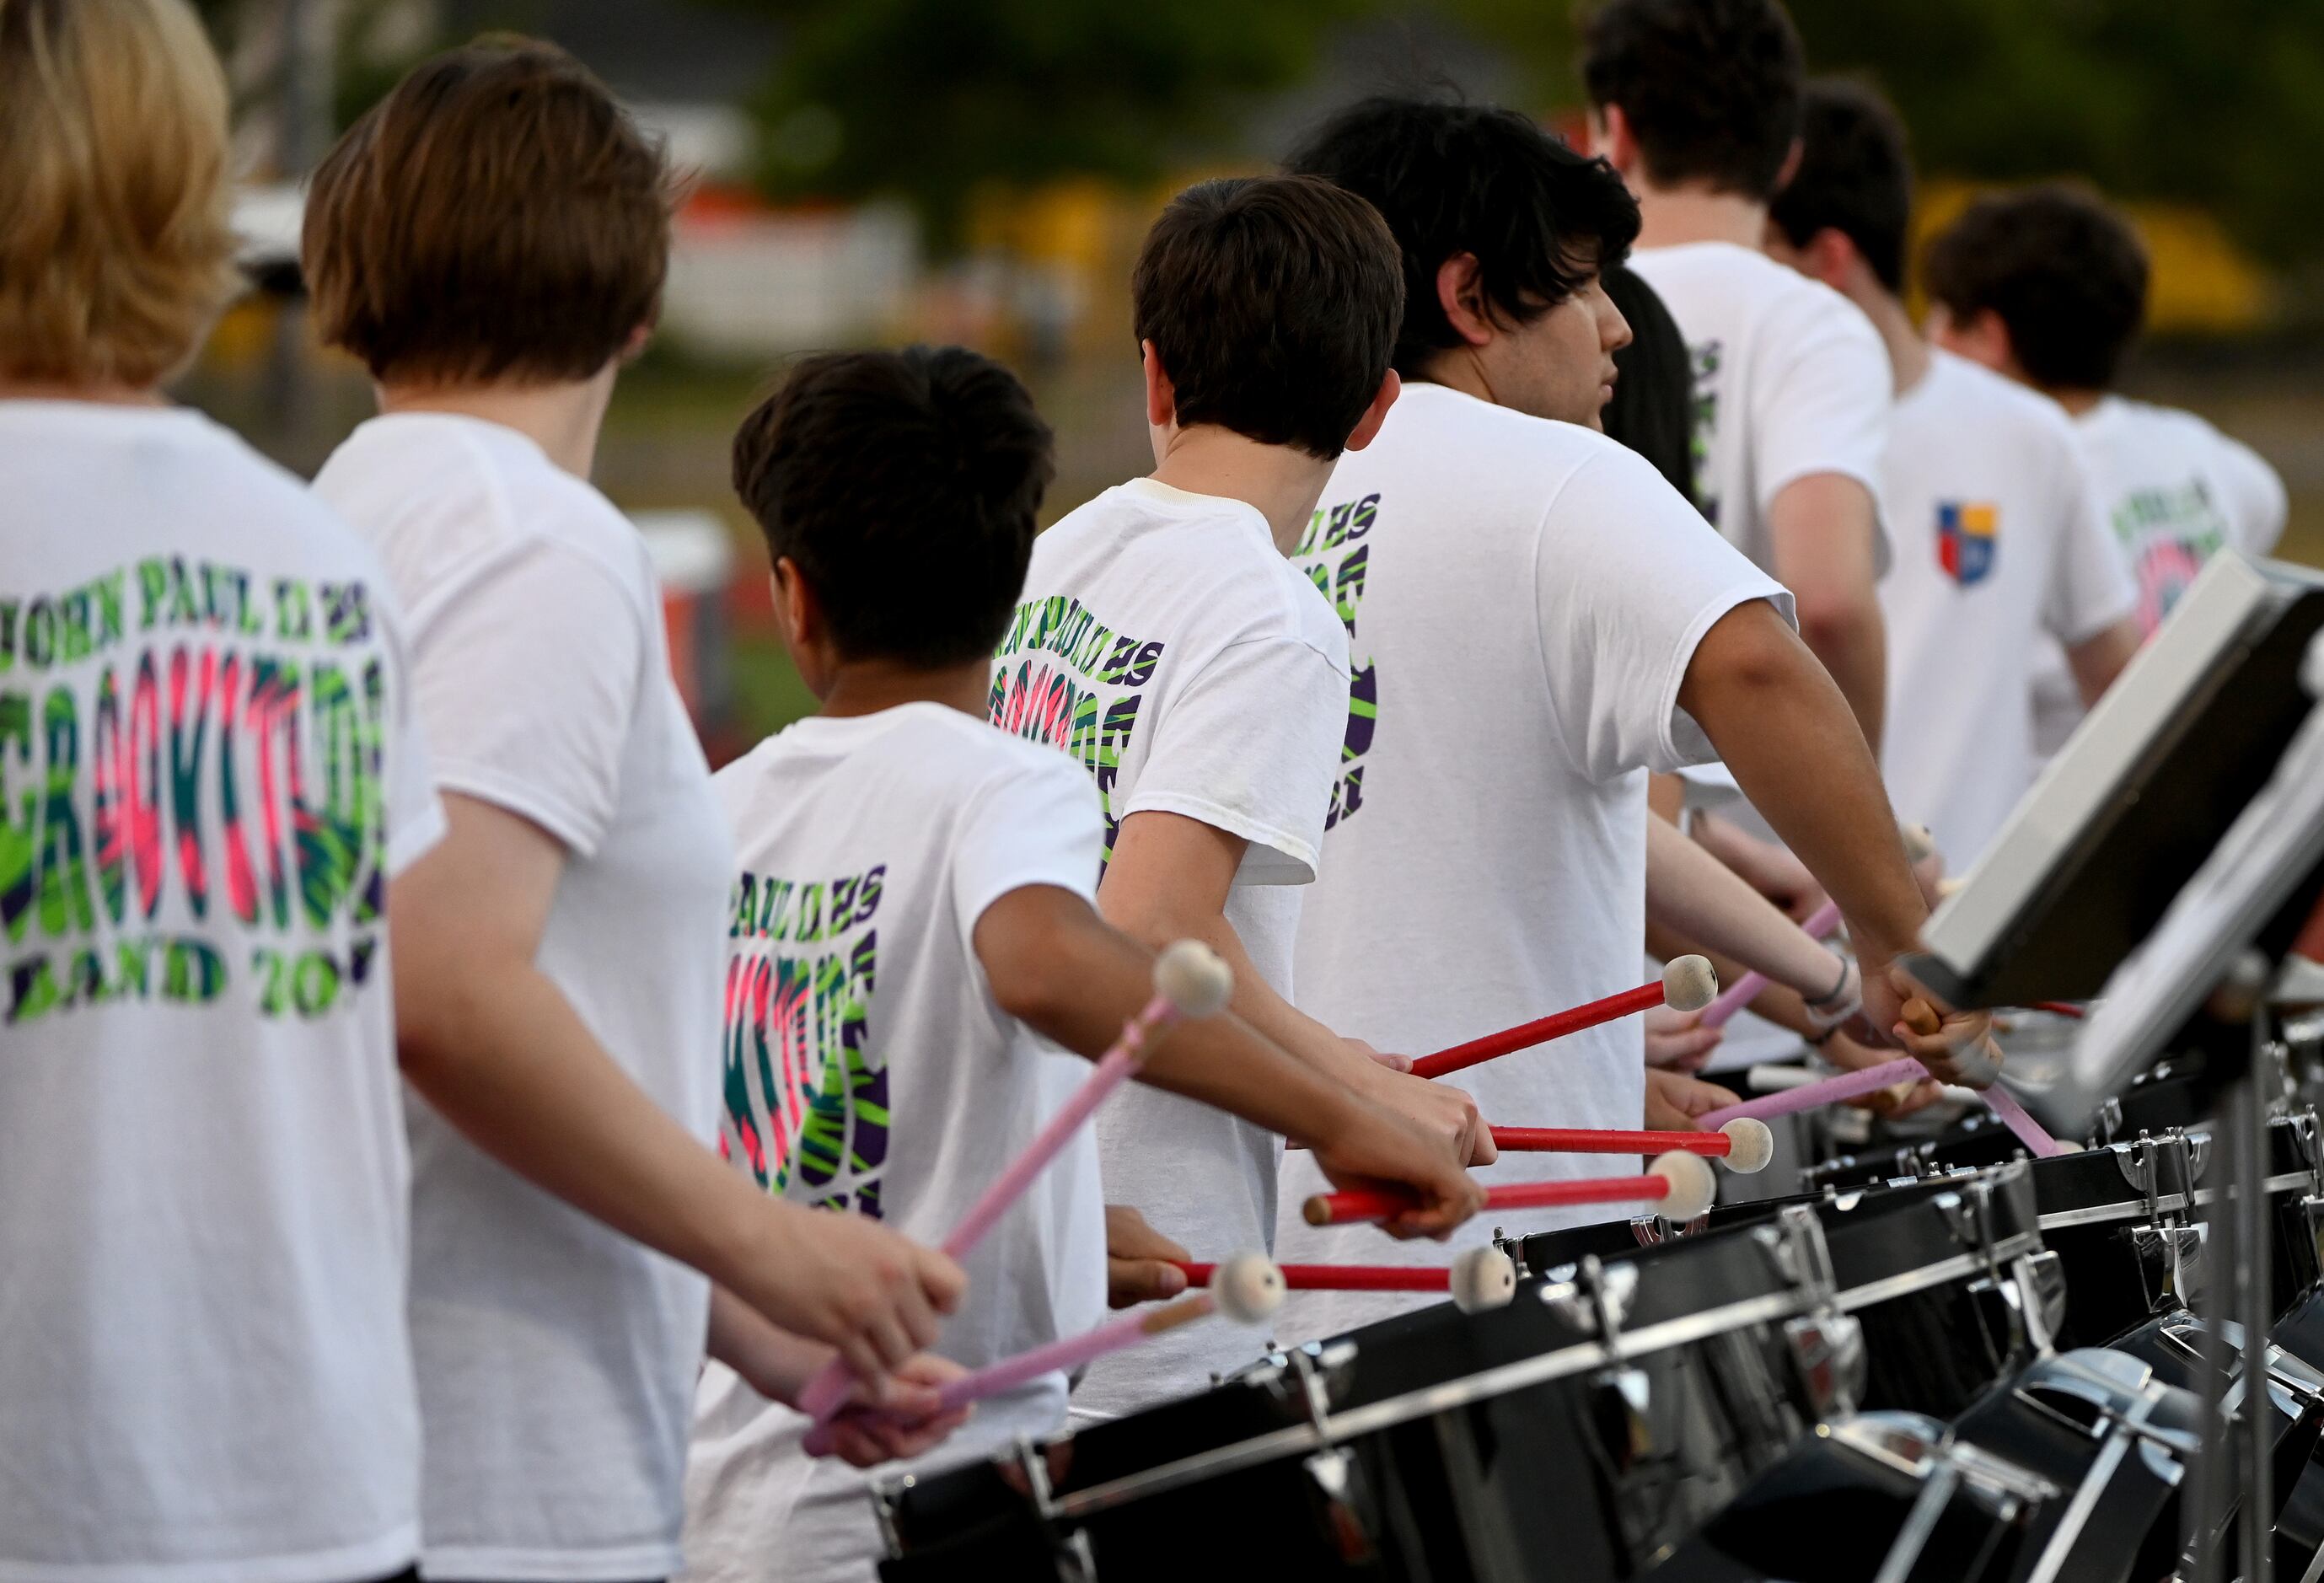 The John Paul II percussion sections plays during a kickoff in the first half of a high...